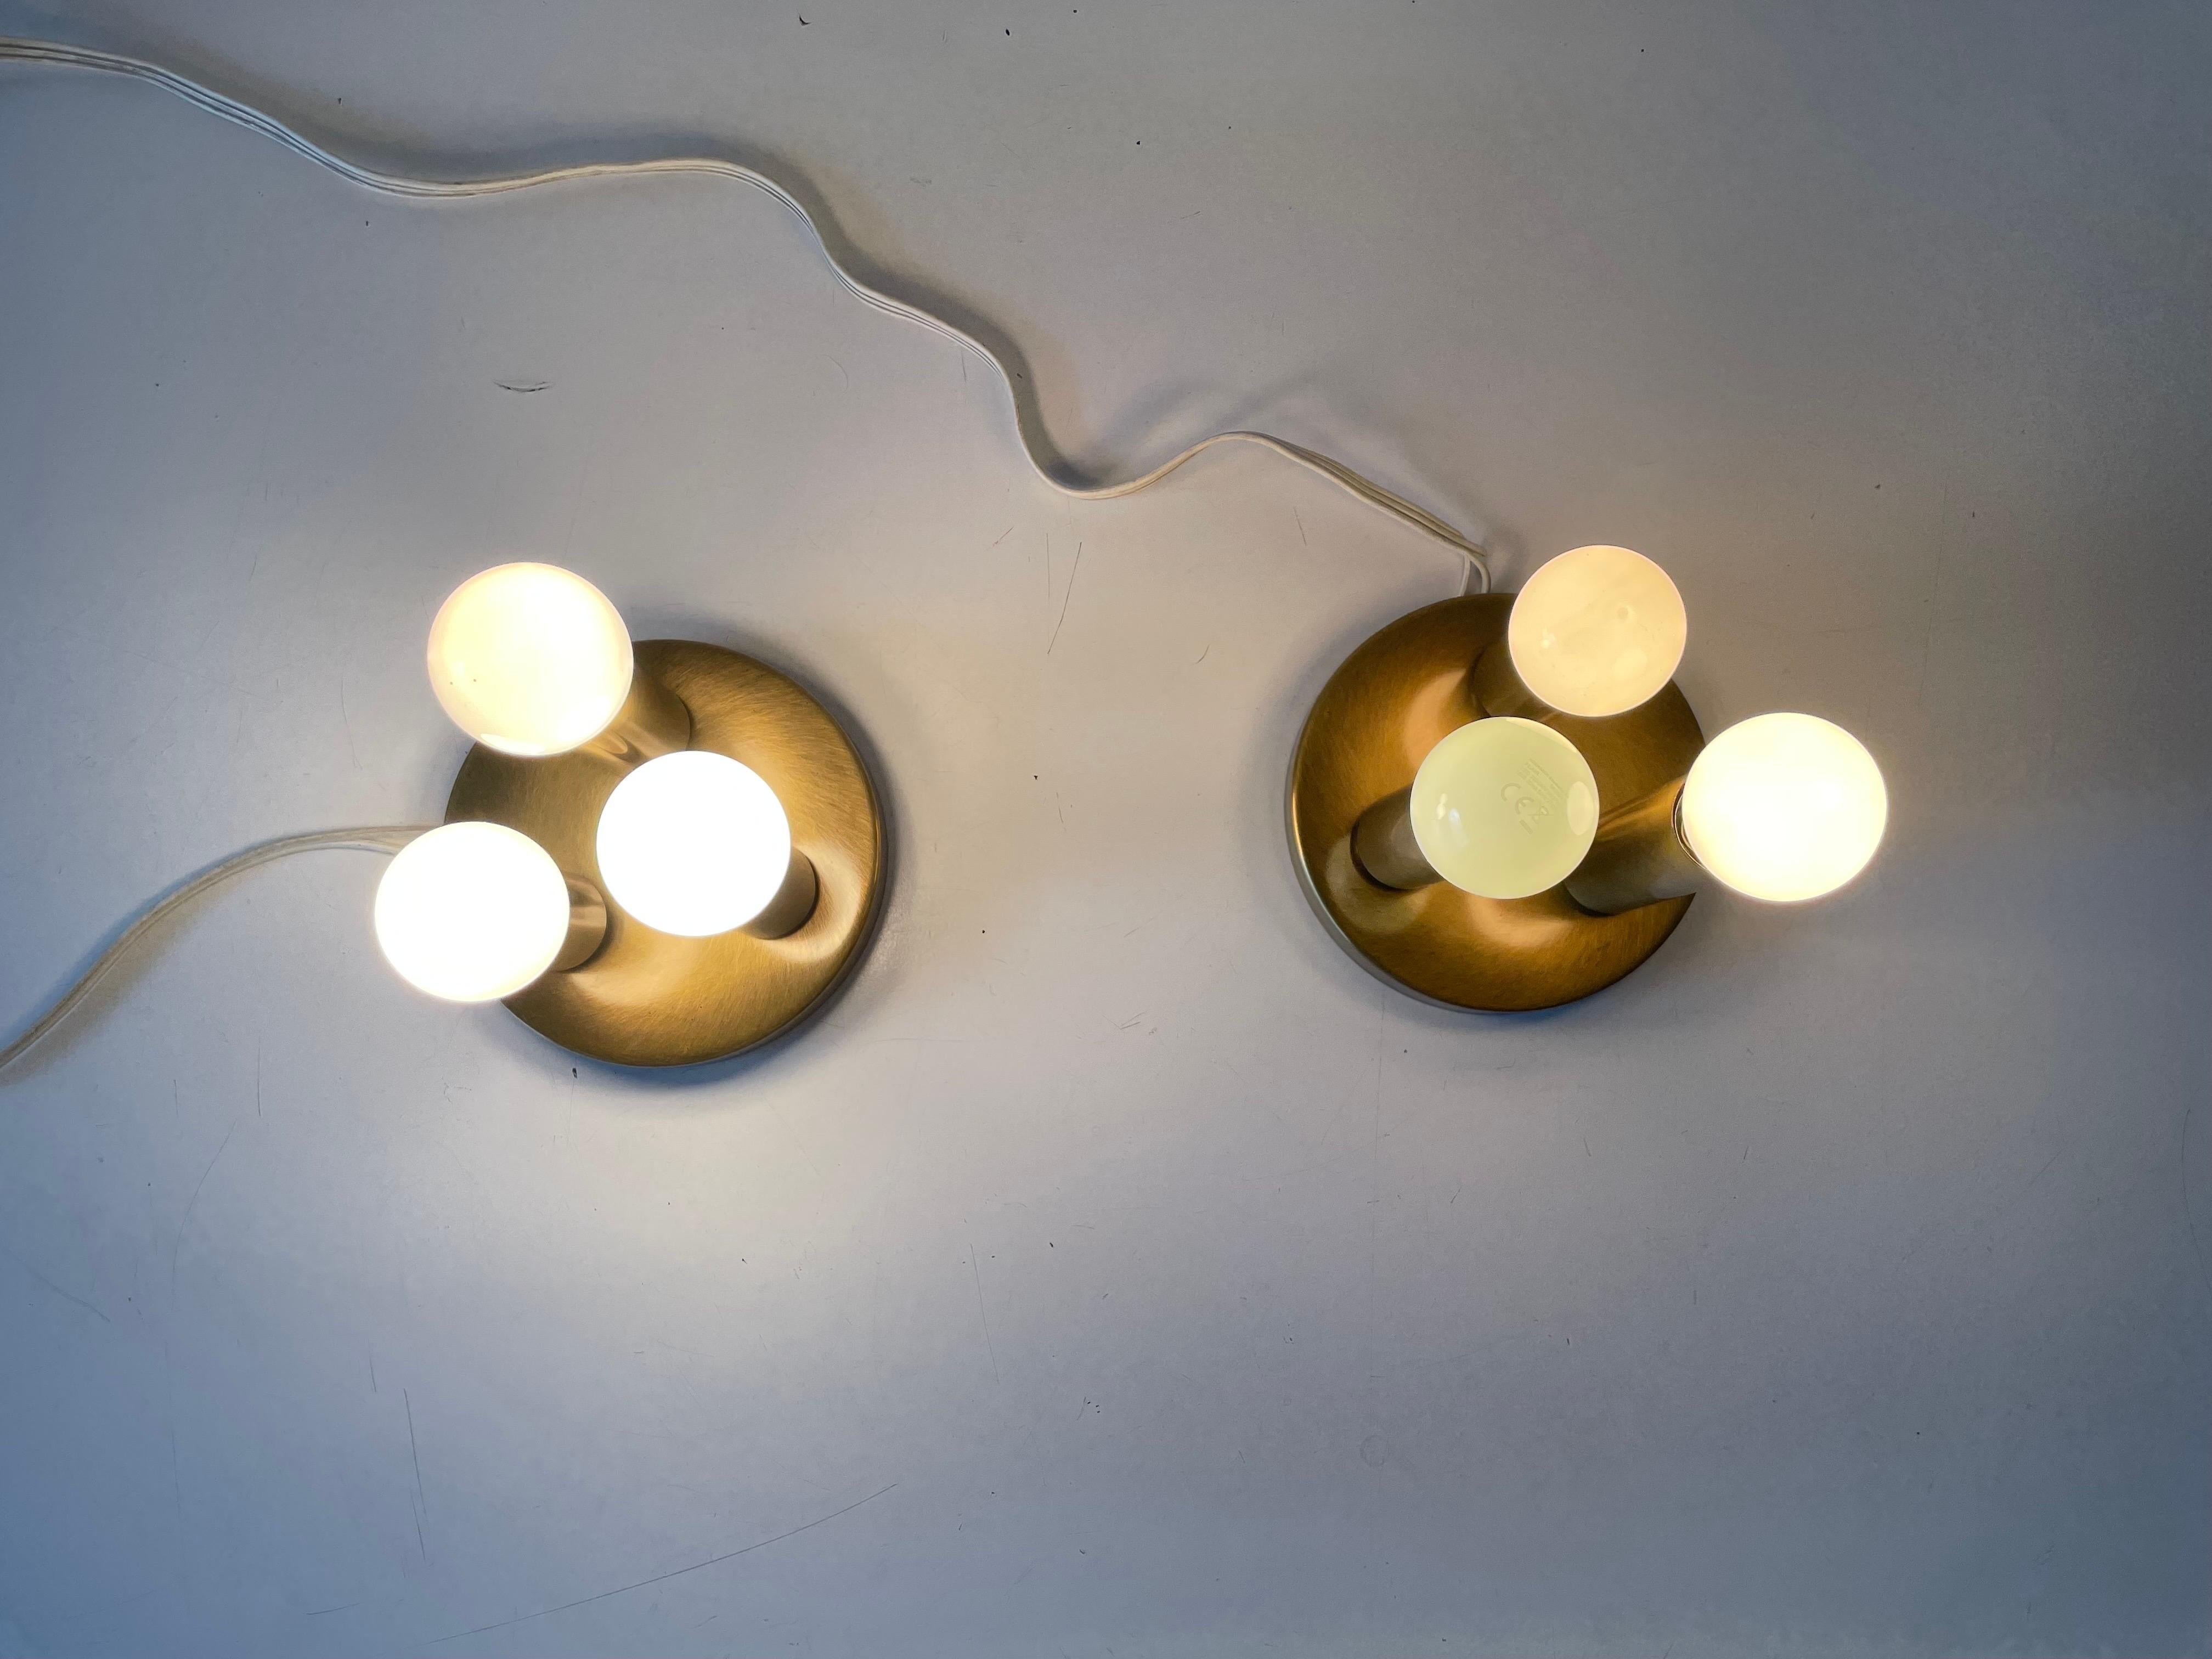 Antique Gold Metal Triple Tube Pair of Ceiling Lamps by TZ, 1960s Germany For Sale 4